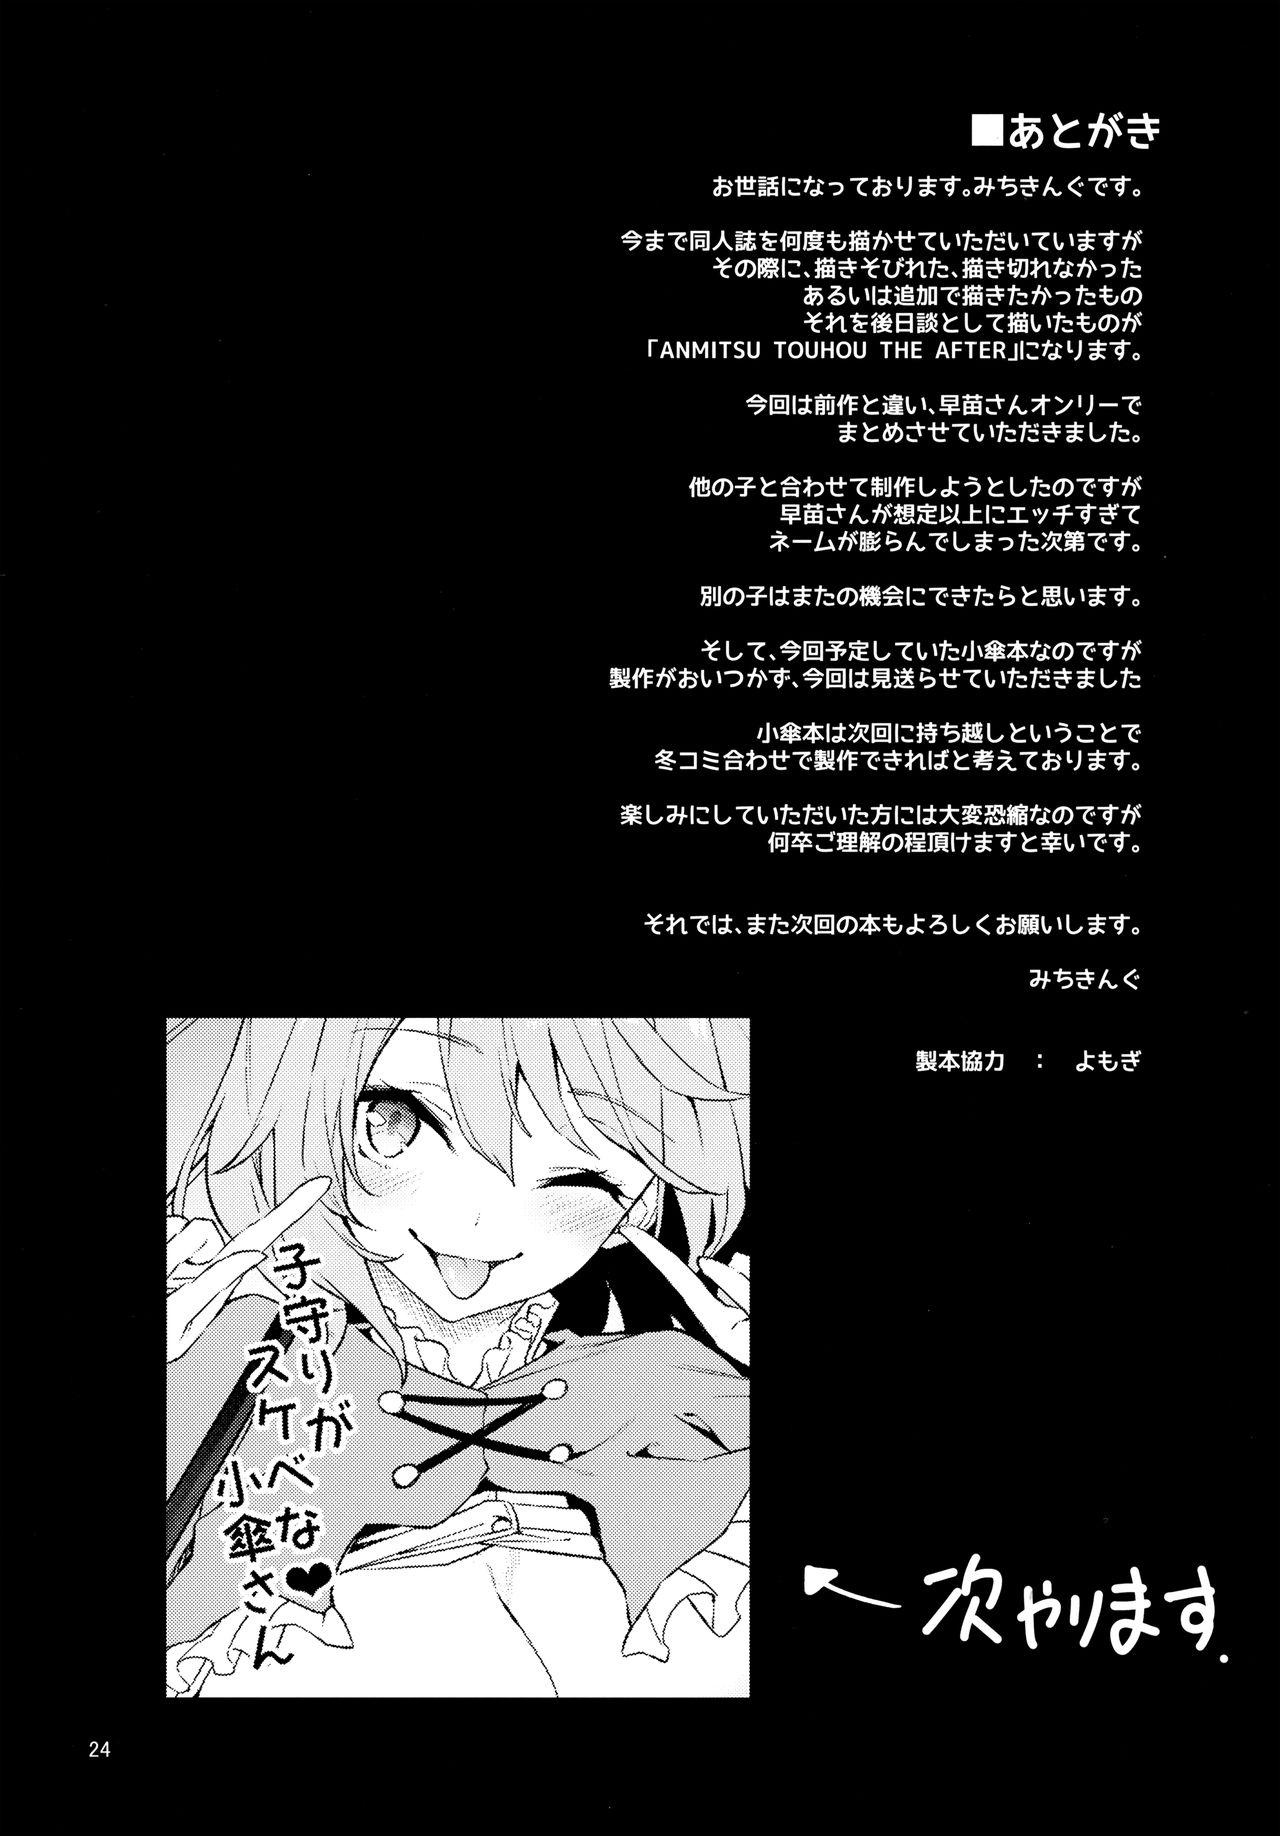 ANMITSU TOUHOU THE AFTER Vol.2 22